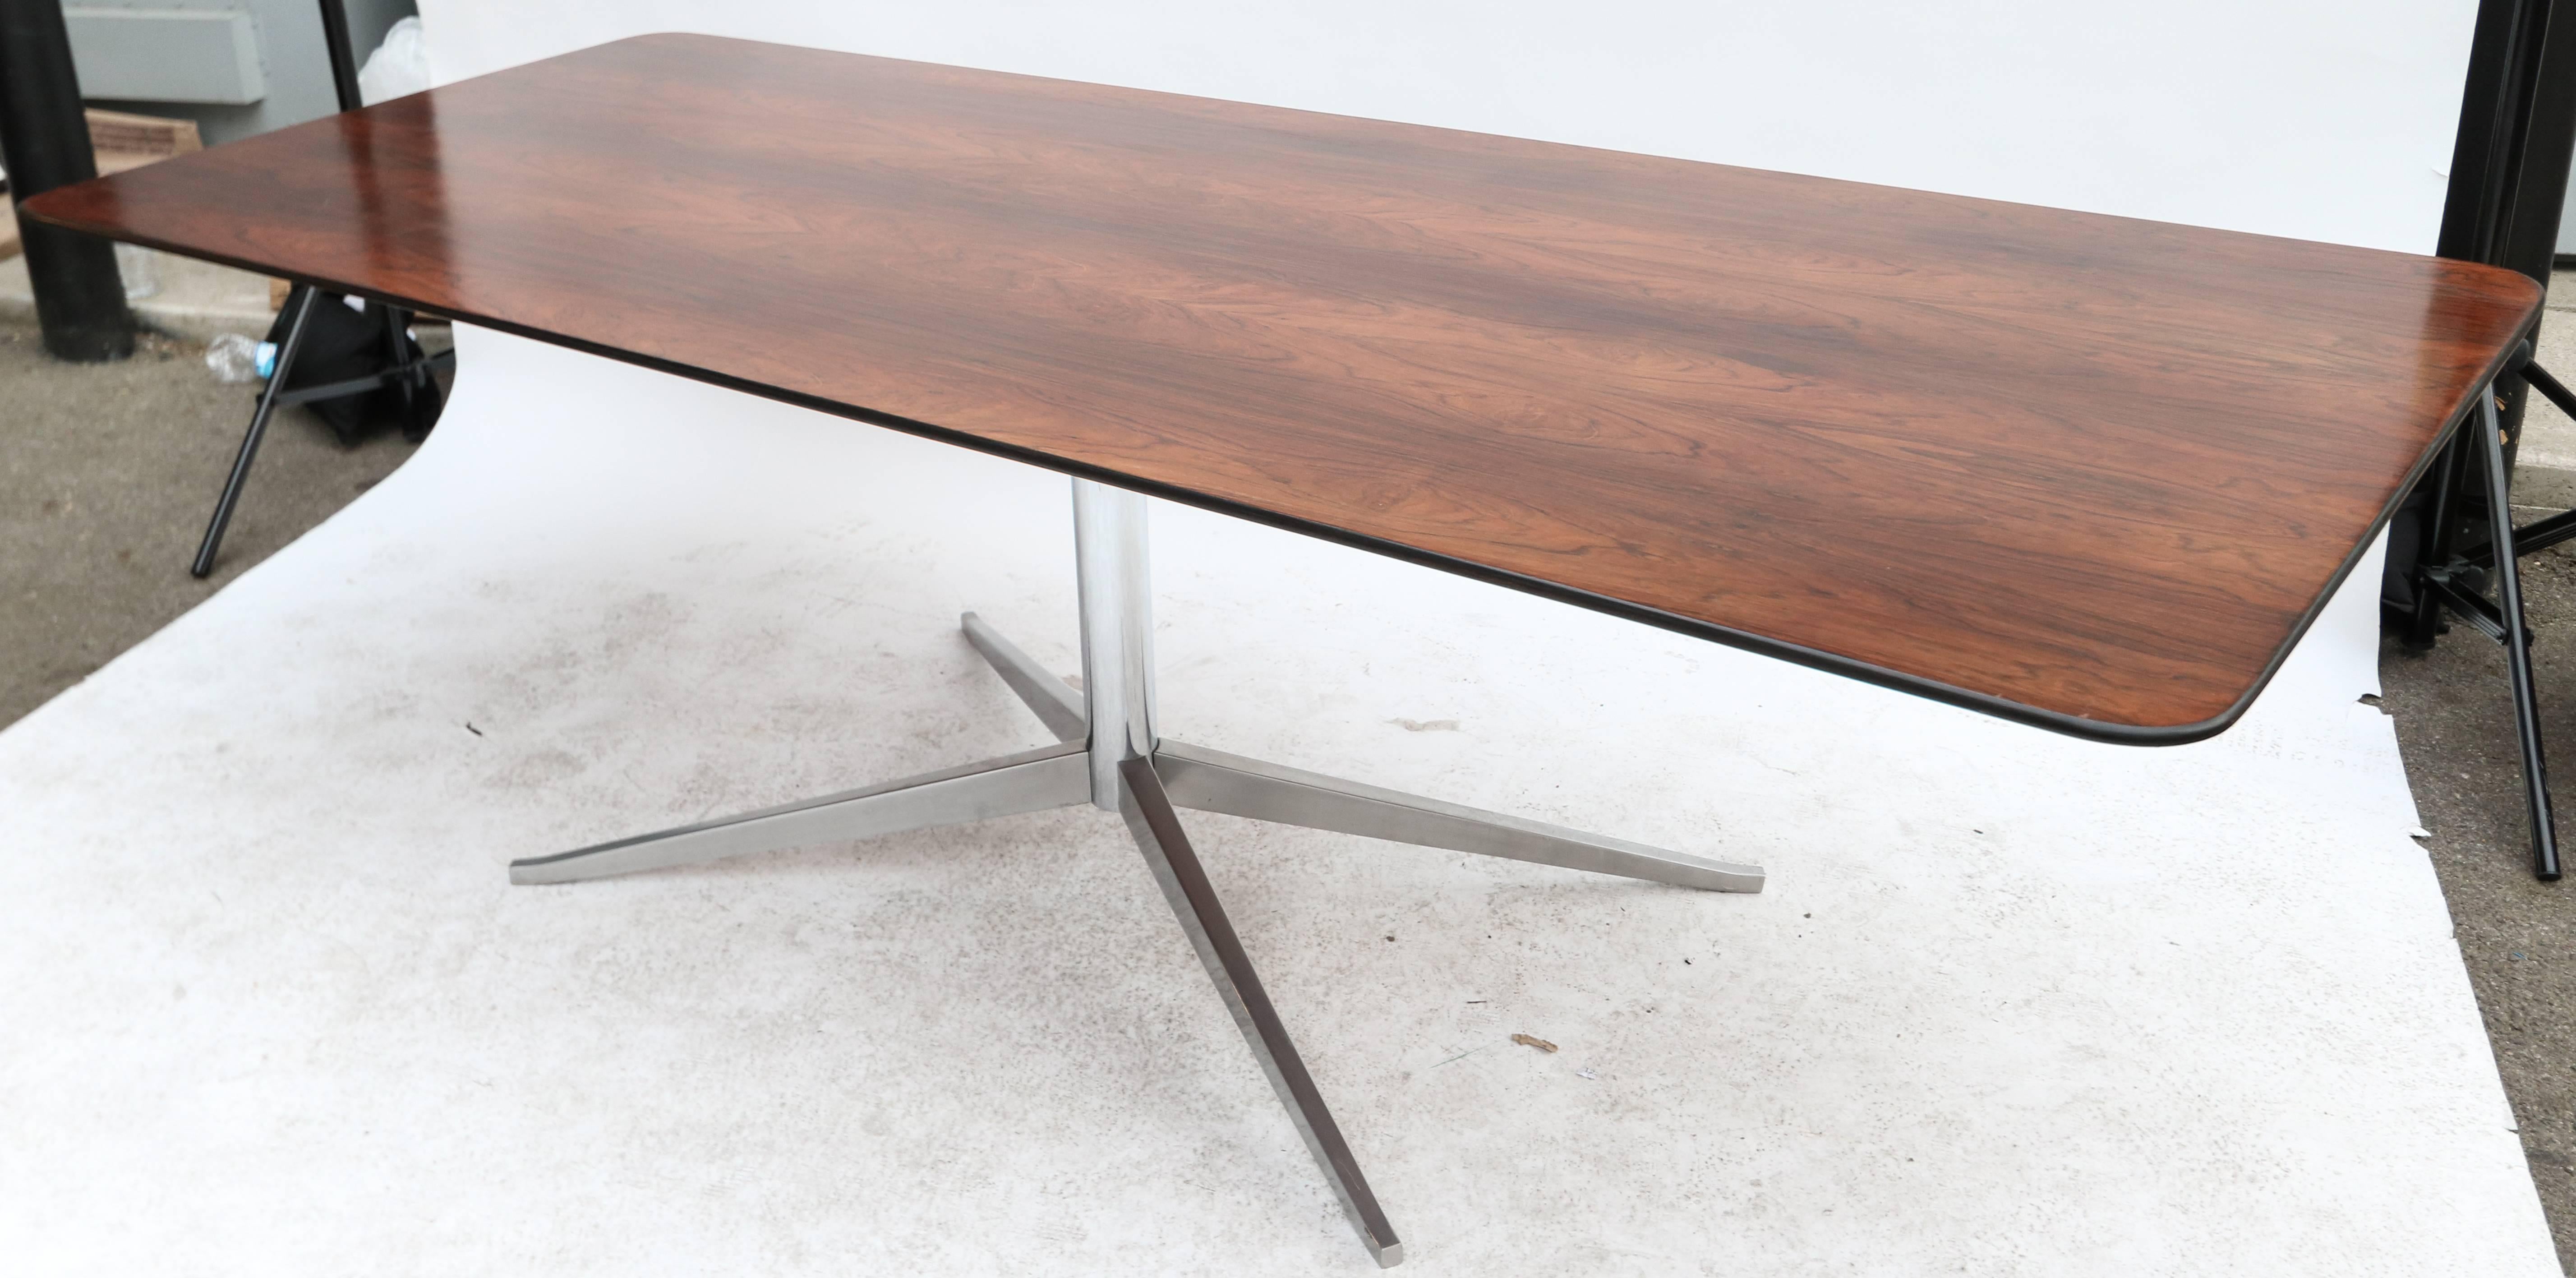 Brazilian Jacaranda wood rectangular dining table for eight by Forma from the 1960s with chrome pedestal leg.